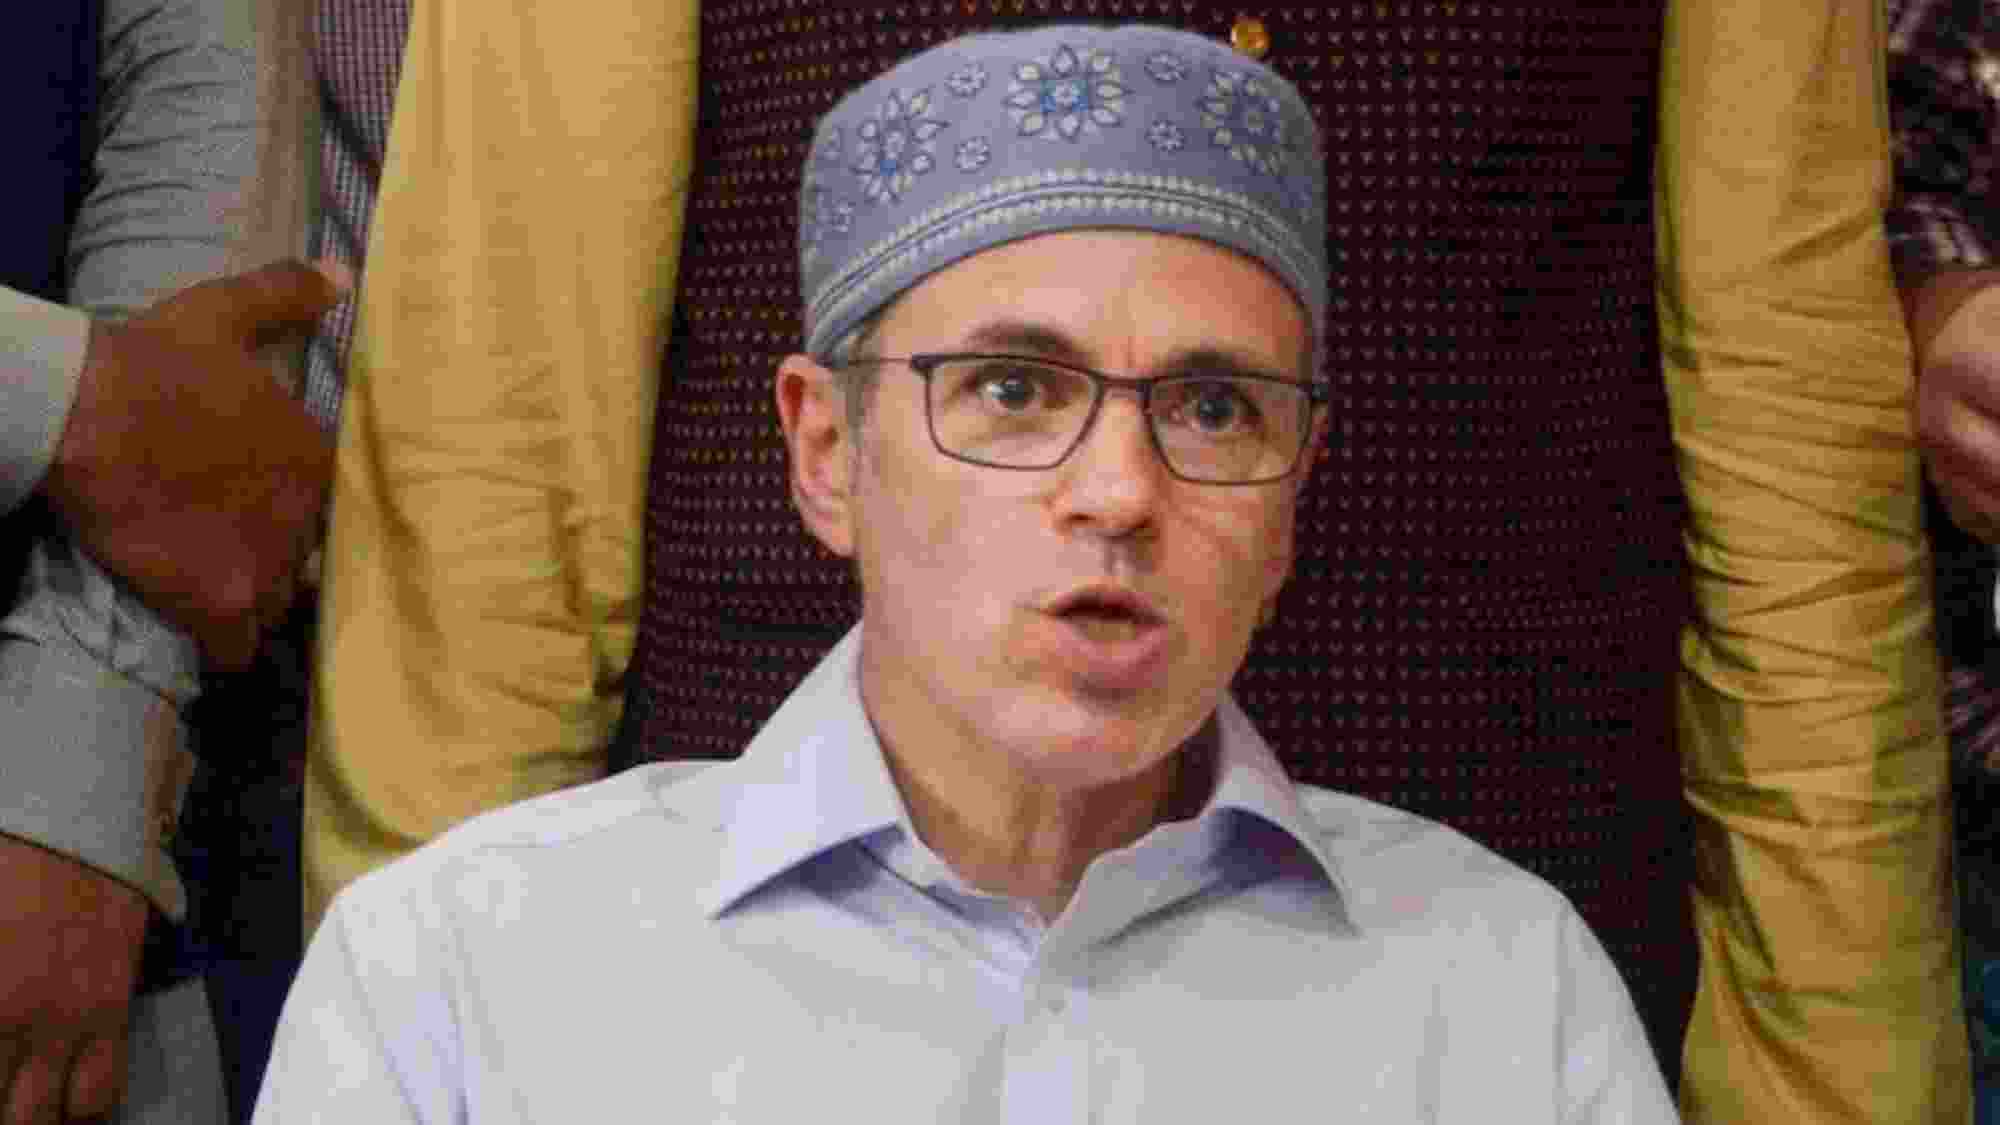 Omar Abdullah has maintained that he will not participate in assembly elections as long as Jammu and Kashmir (J&K) remains a Union Territory (UT).